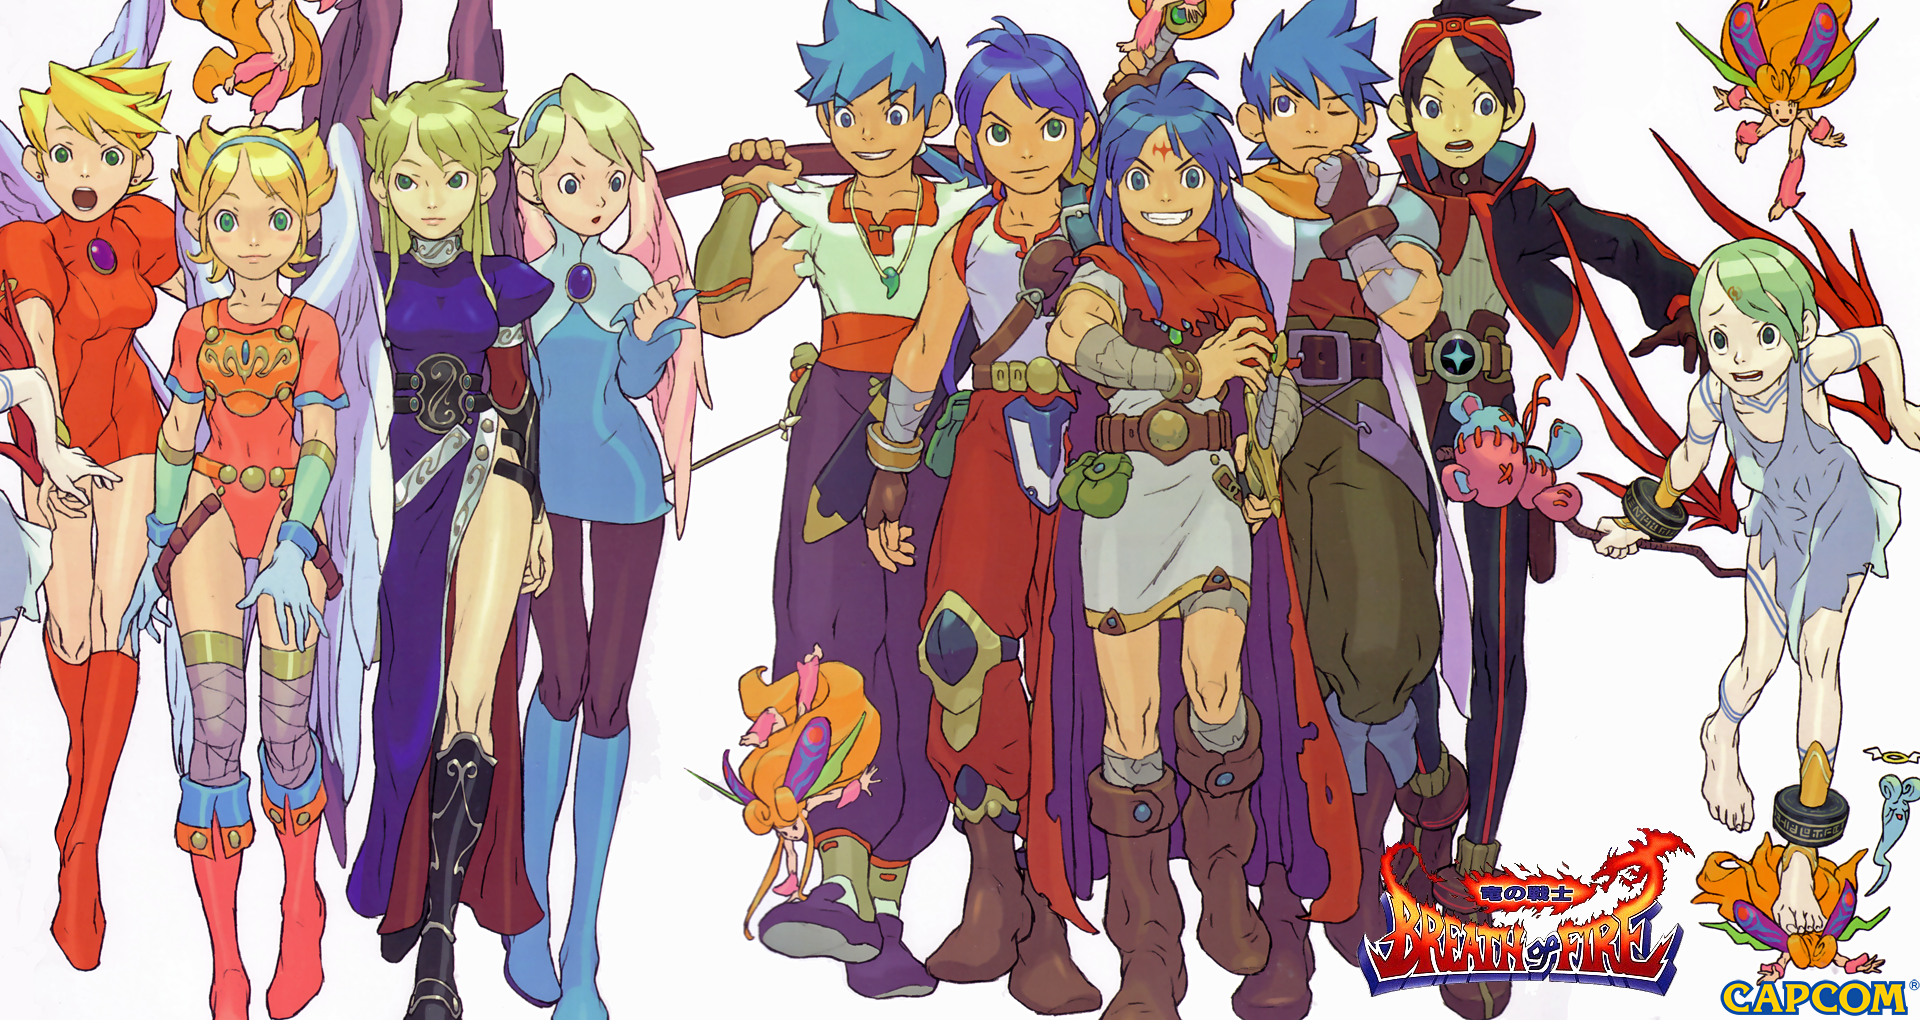 Dungeonbuster: Breath of Fire III (1997) by Capcom was an RPG for the Sony  PlayStation. In a world where dragons are long extinct, a baby dragon has  been discovered! Escaping and then